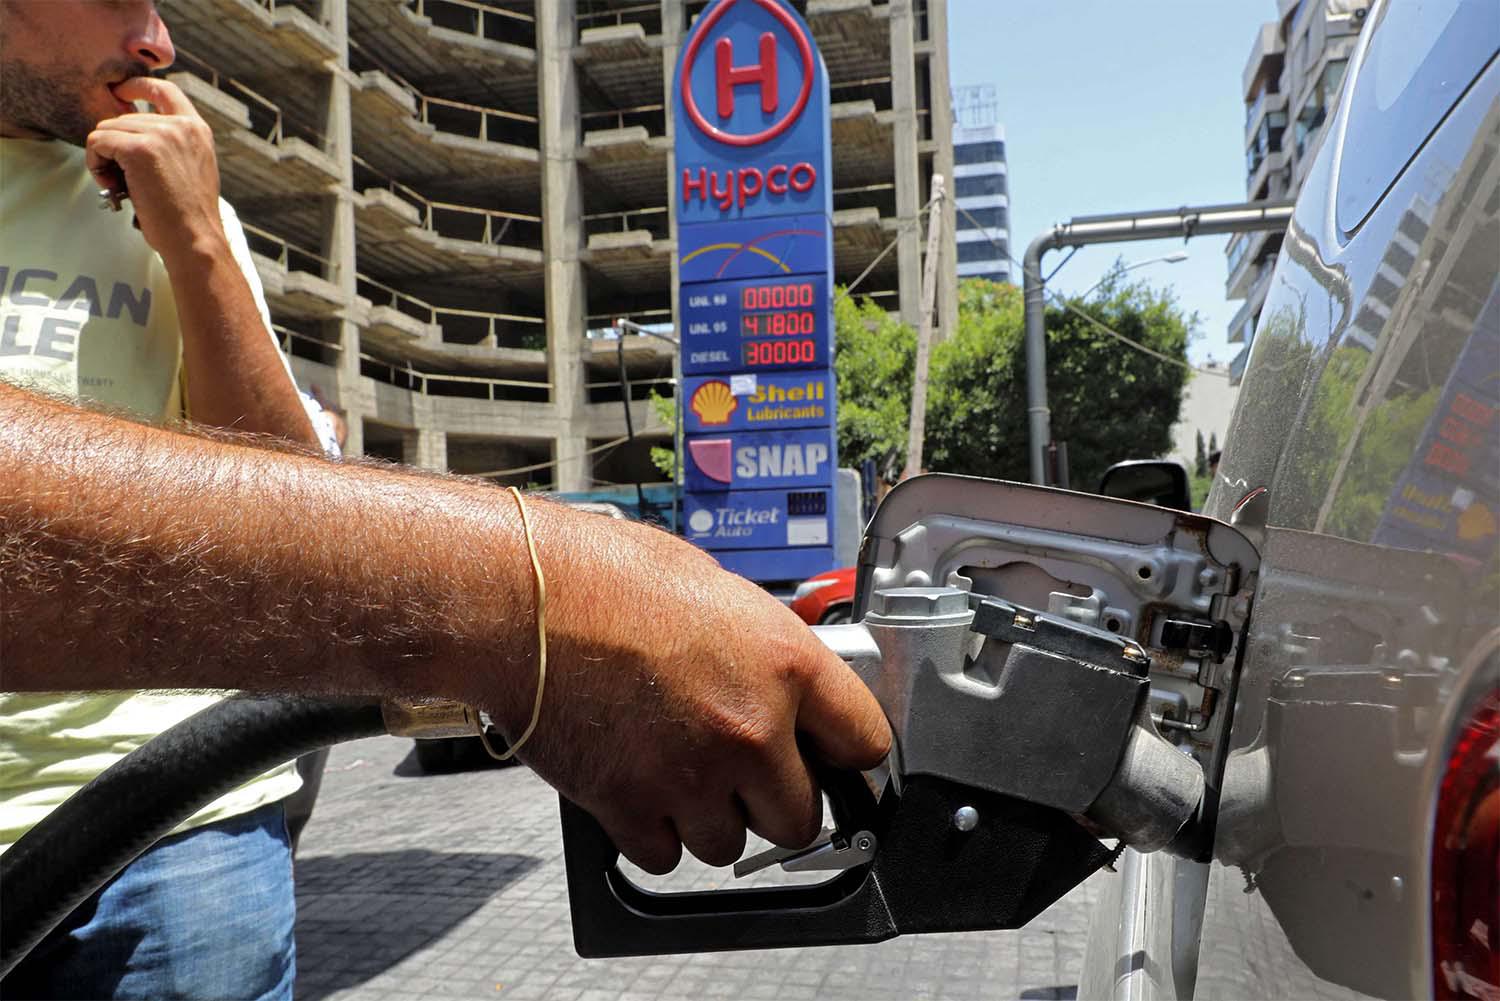 The increase in gasoline prices will add burdens on a population already reeling from the effects of an economic meltdown